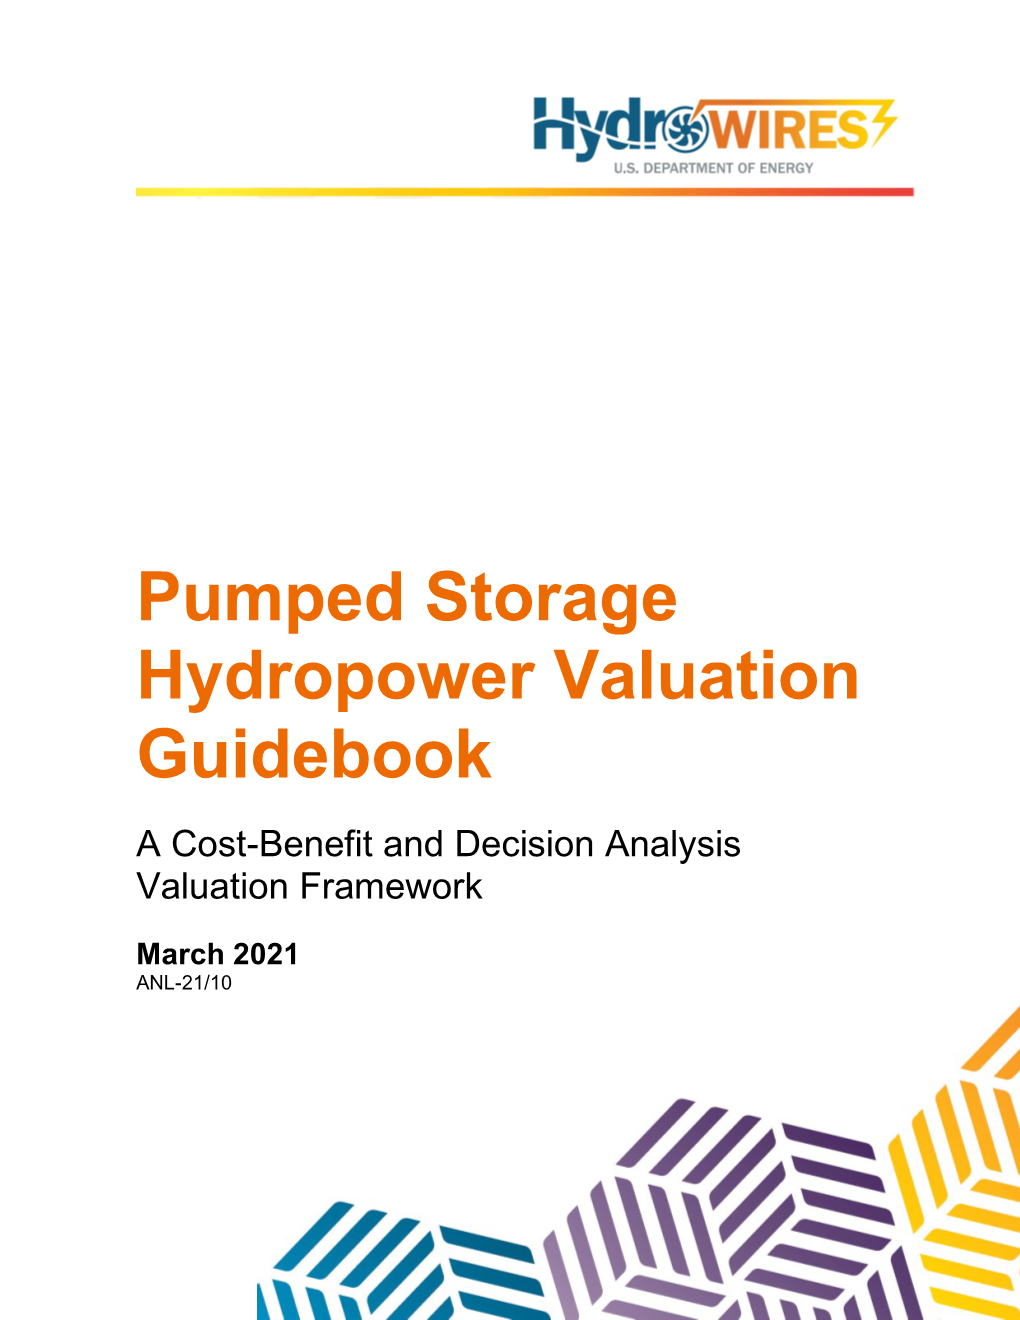 Pumped Storage Hydropower Valuation Guidebook a Cost-Benefit and Decision Analysis Valuation Framework